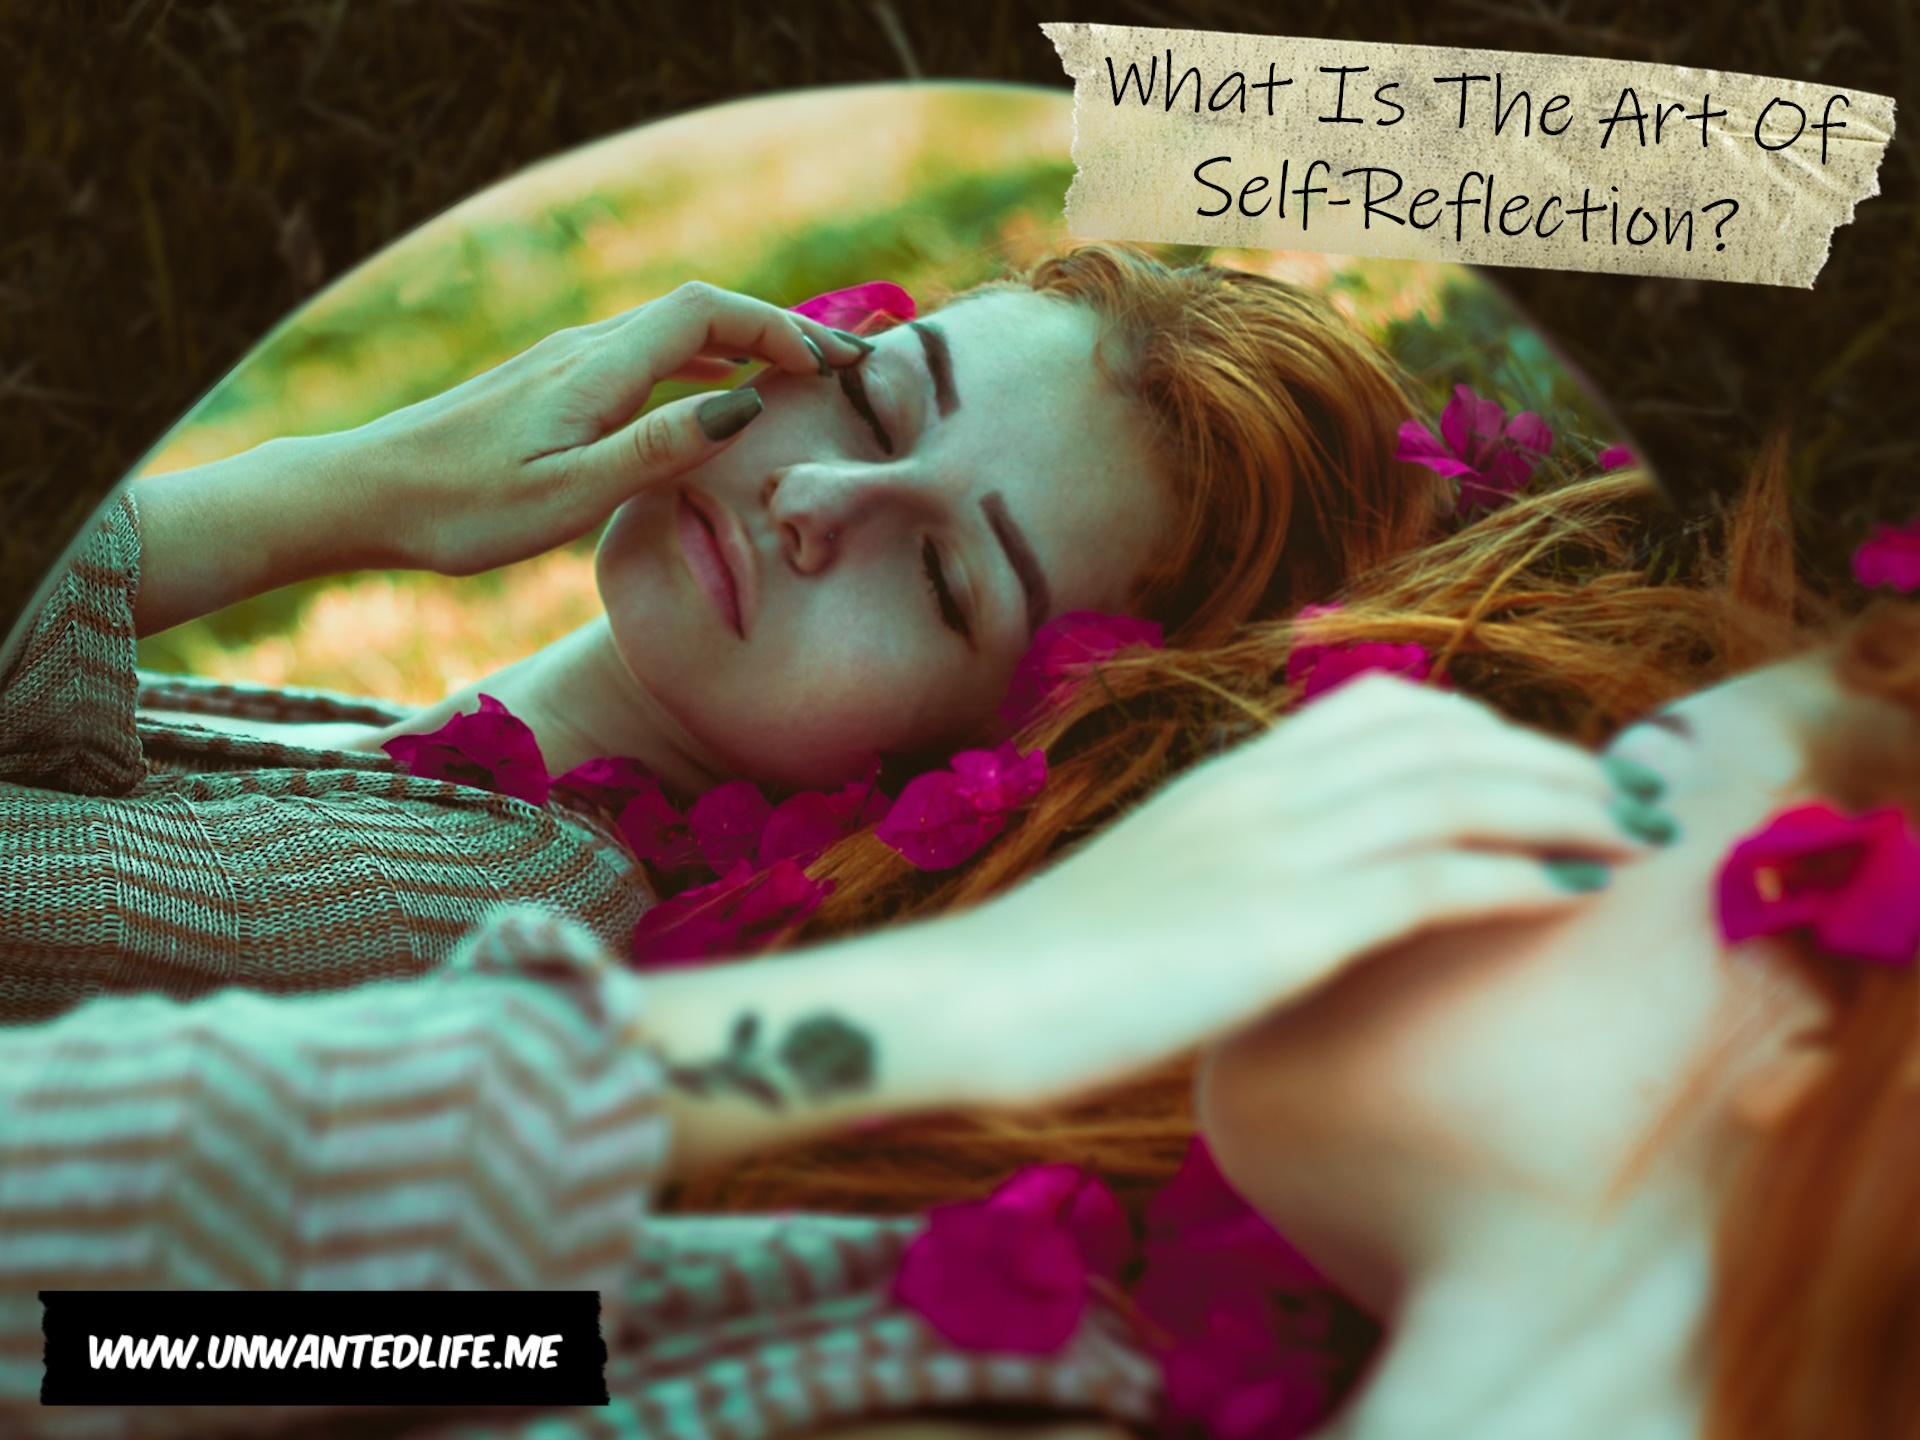 A photo of aWhite woman laying in a meadow with a reflection of her appearing in a mirror. The image represents the topic of the article - What Is The Art Of Self-Reflection?